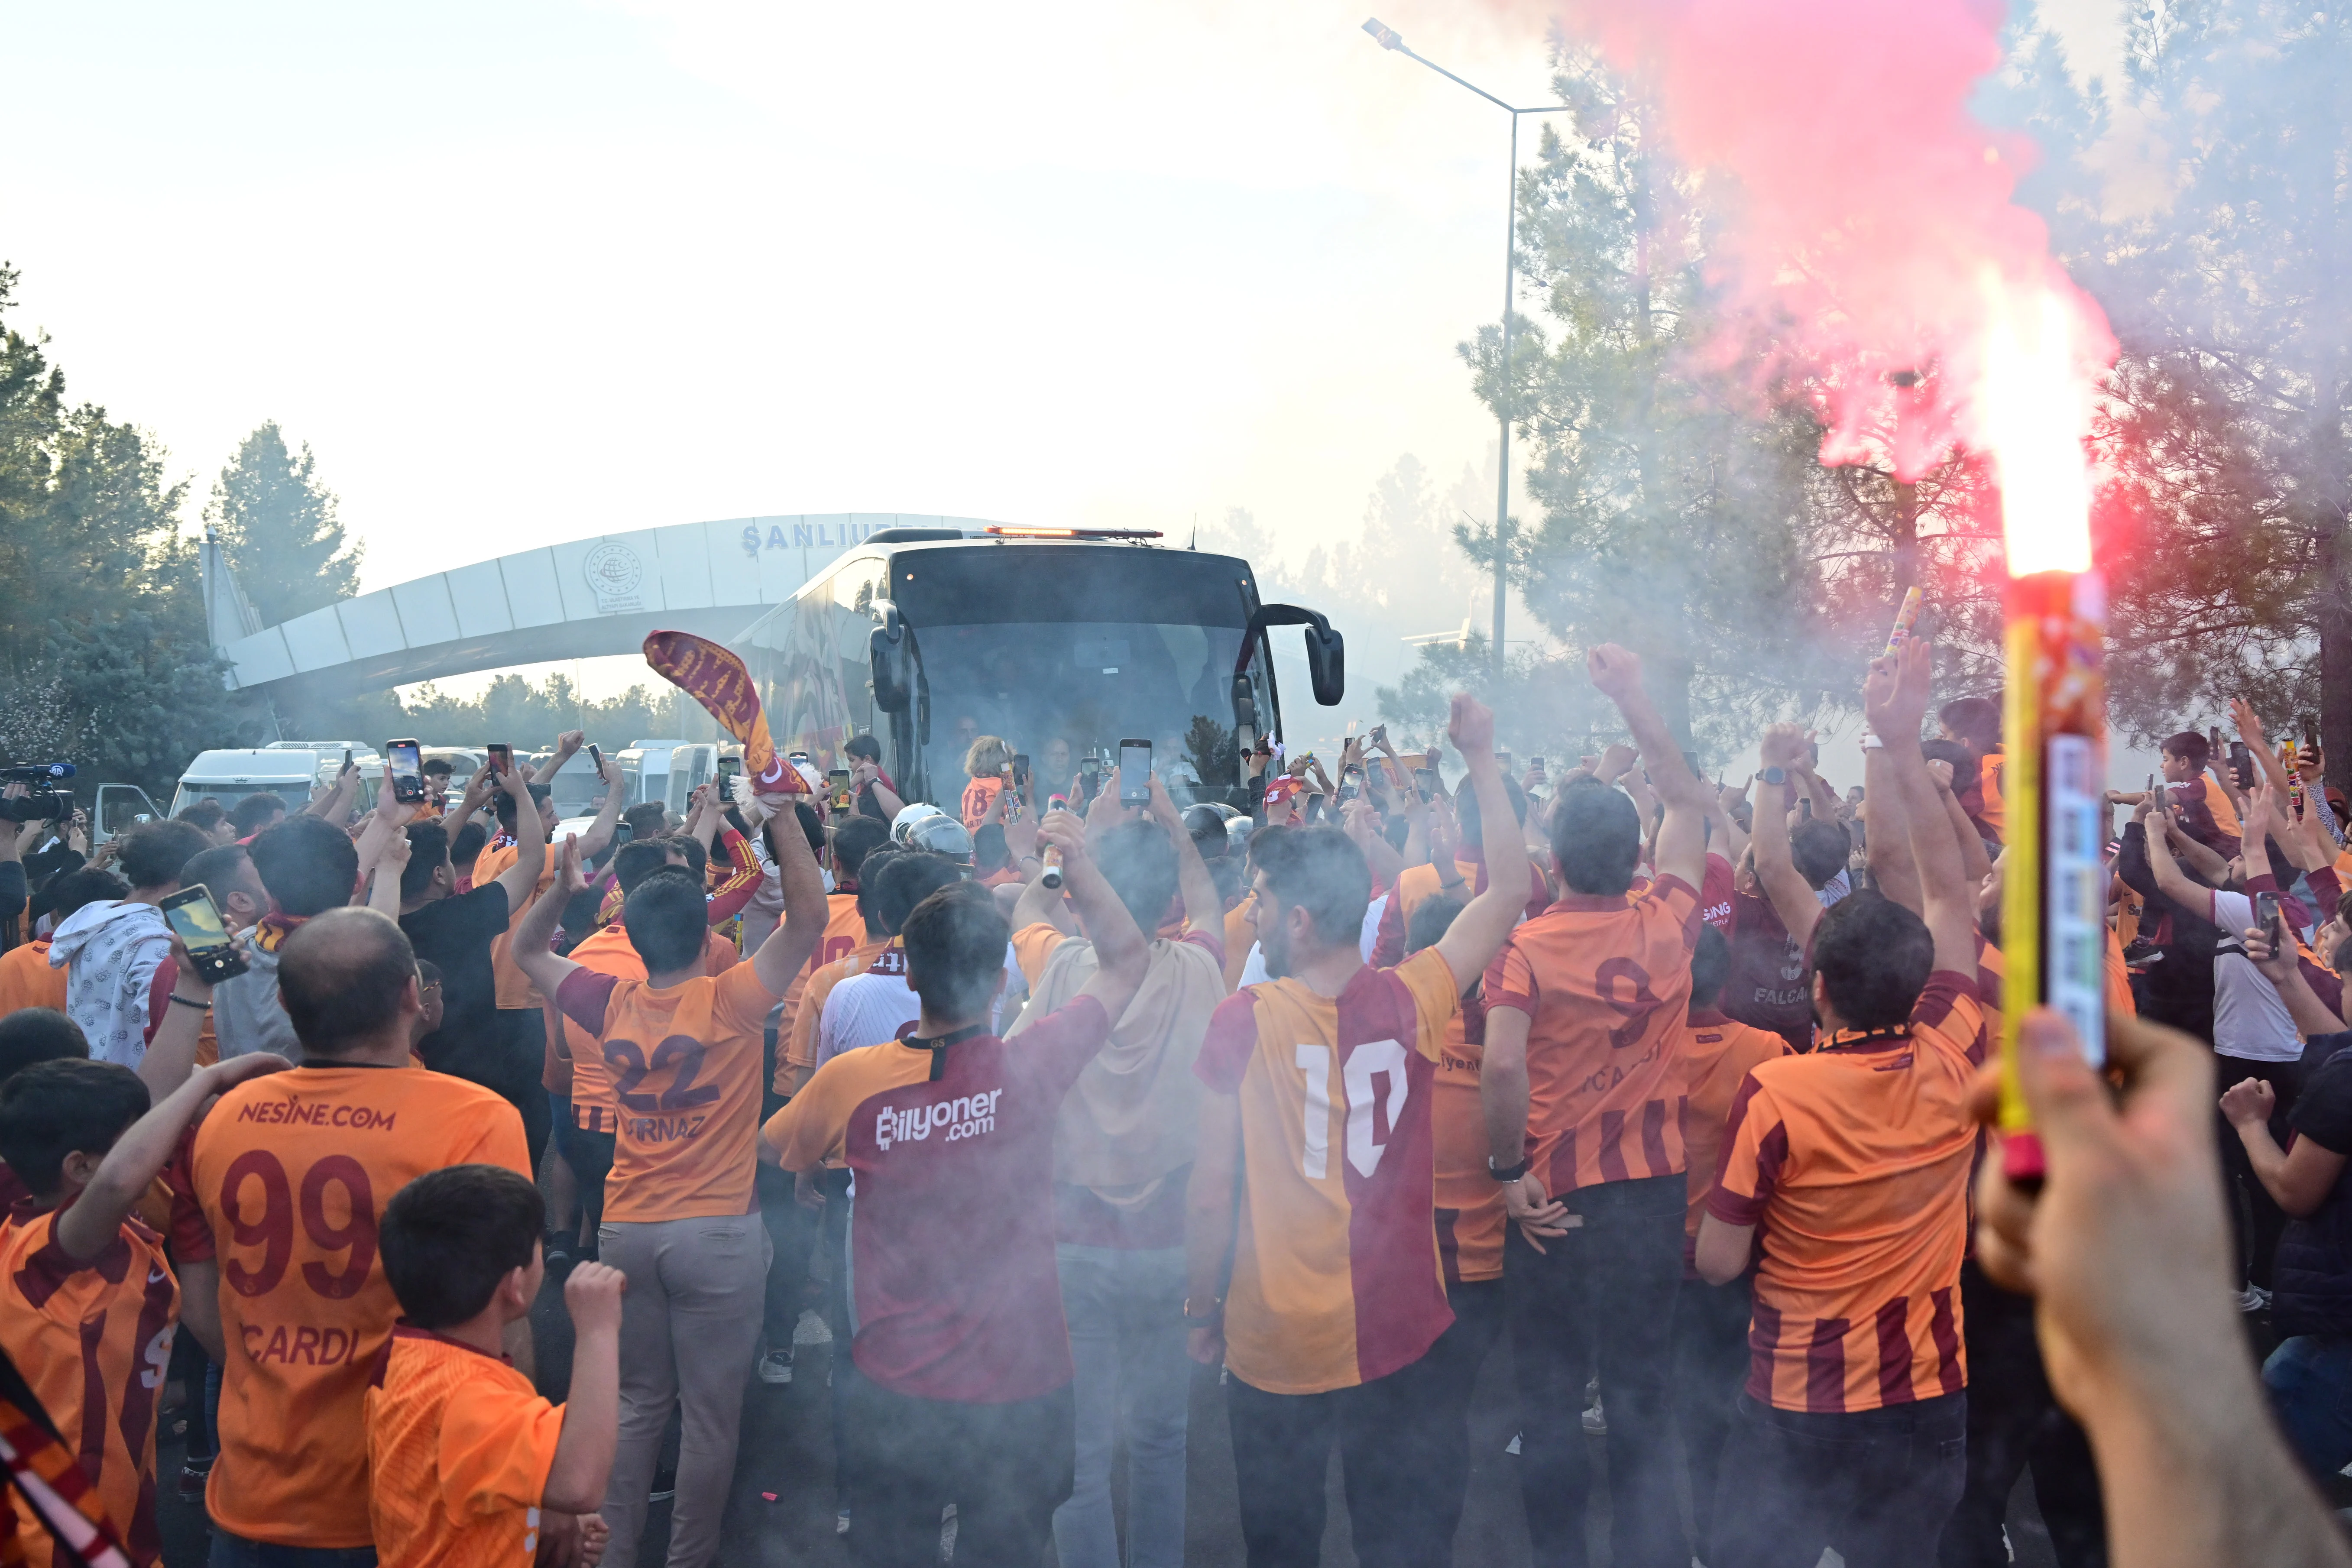 aa-20240406-34203395-34203391-galatasaray-arrives-in-turkiyes-sanliurfa-for-turkcell-super-cup-match.webp